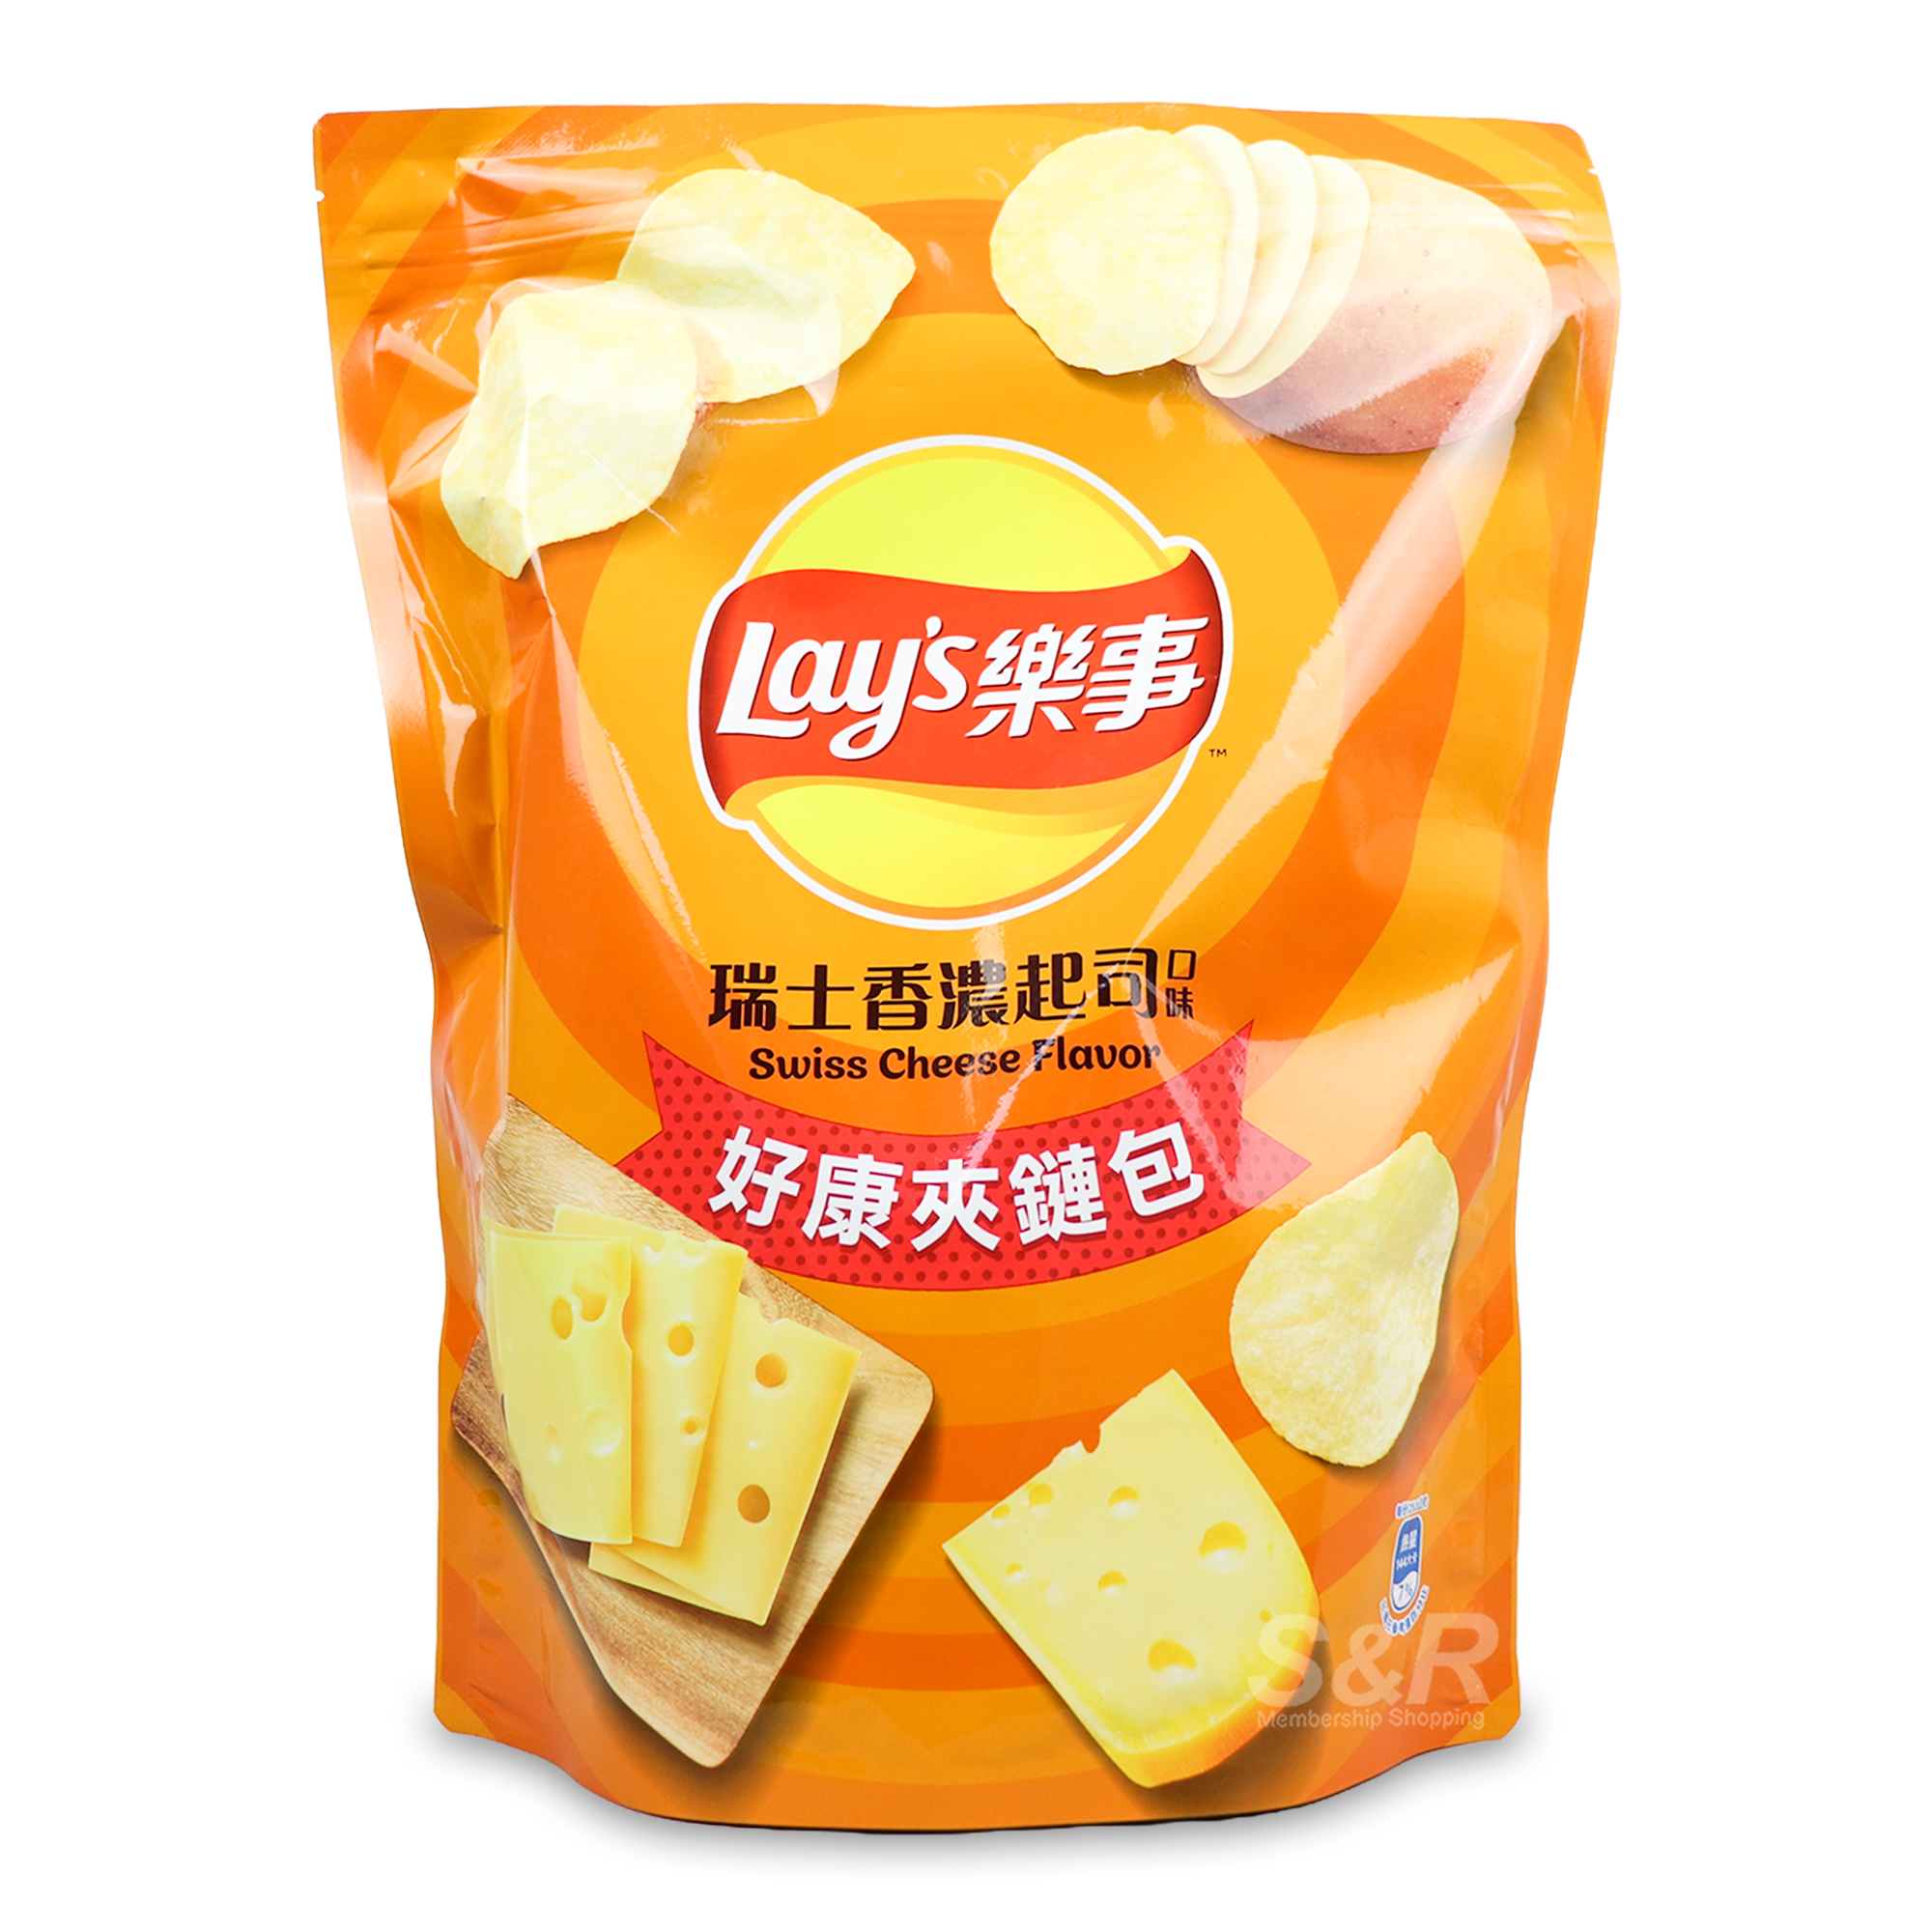 Lay's Swiss Cheese Flavor Potato Chips 229g